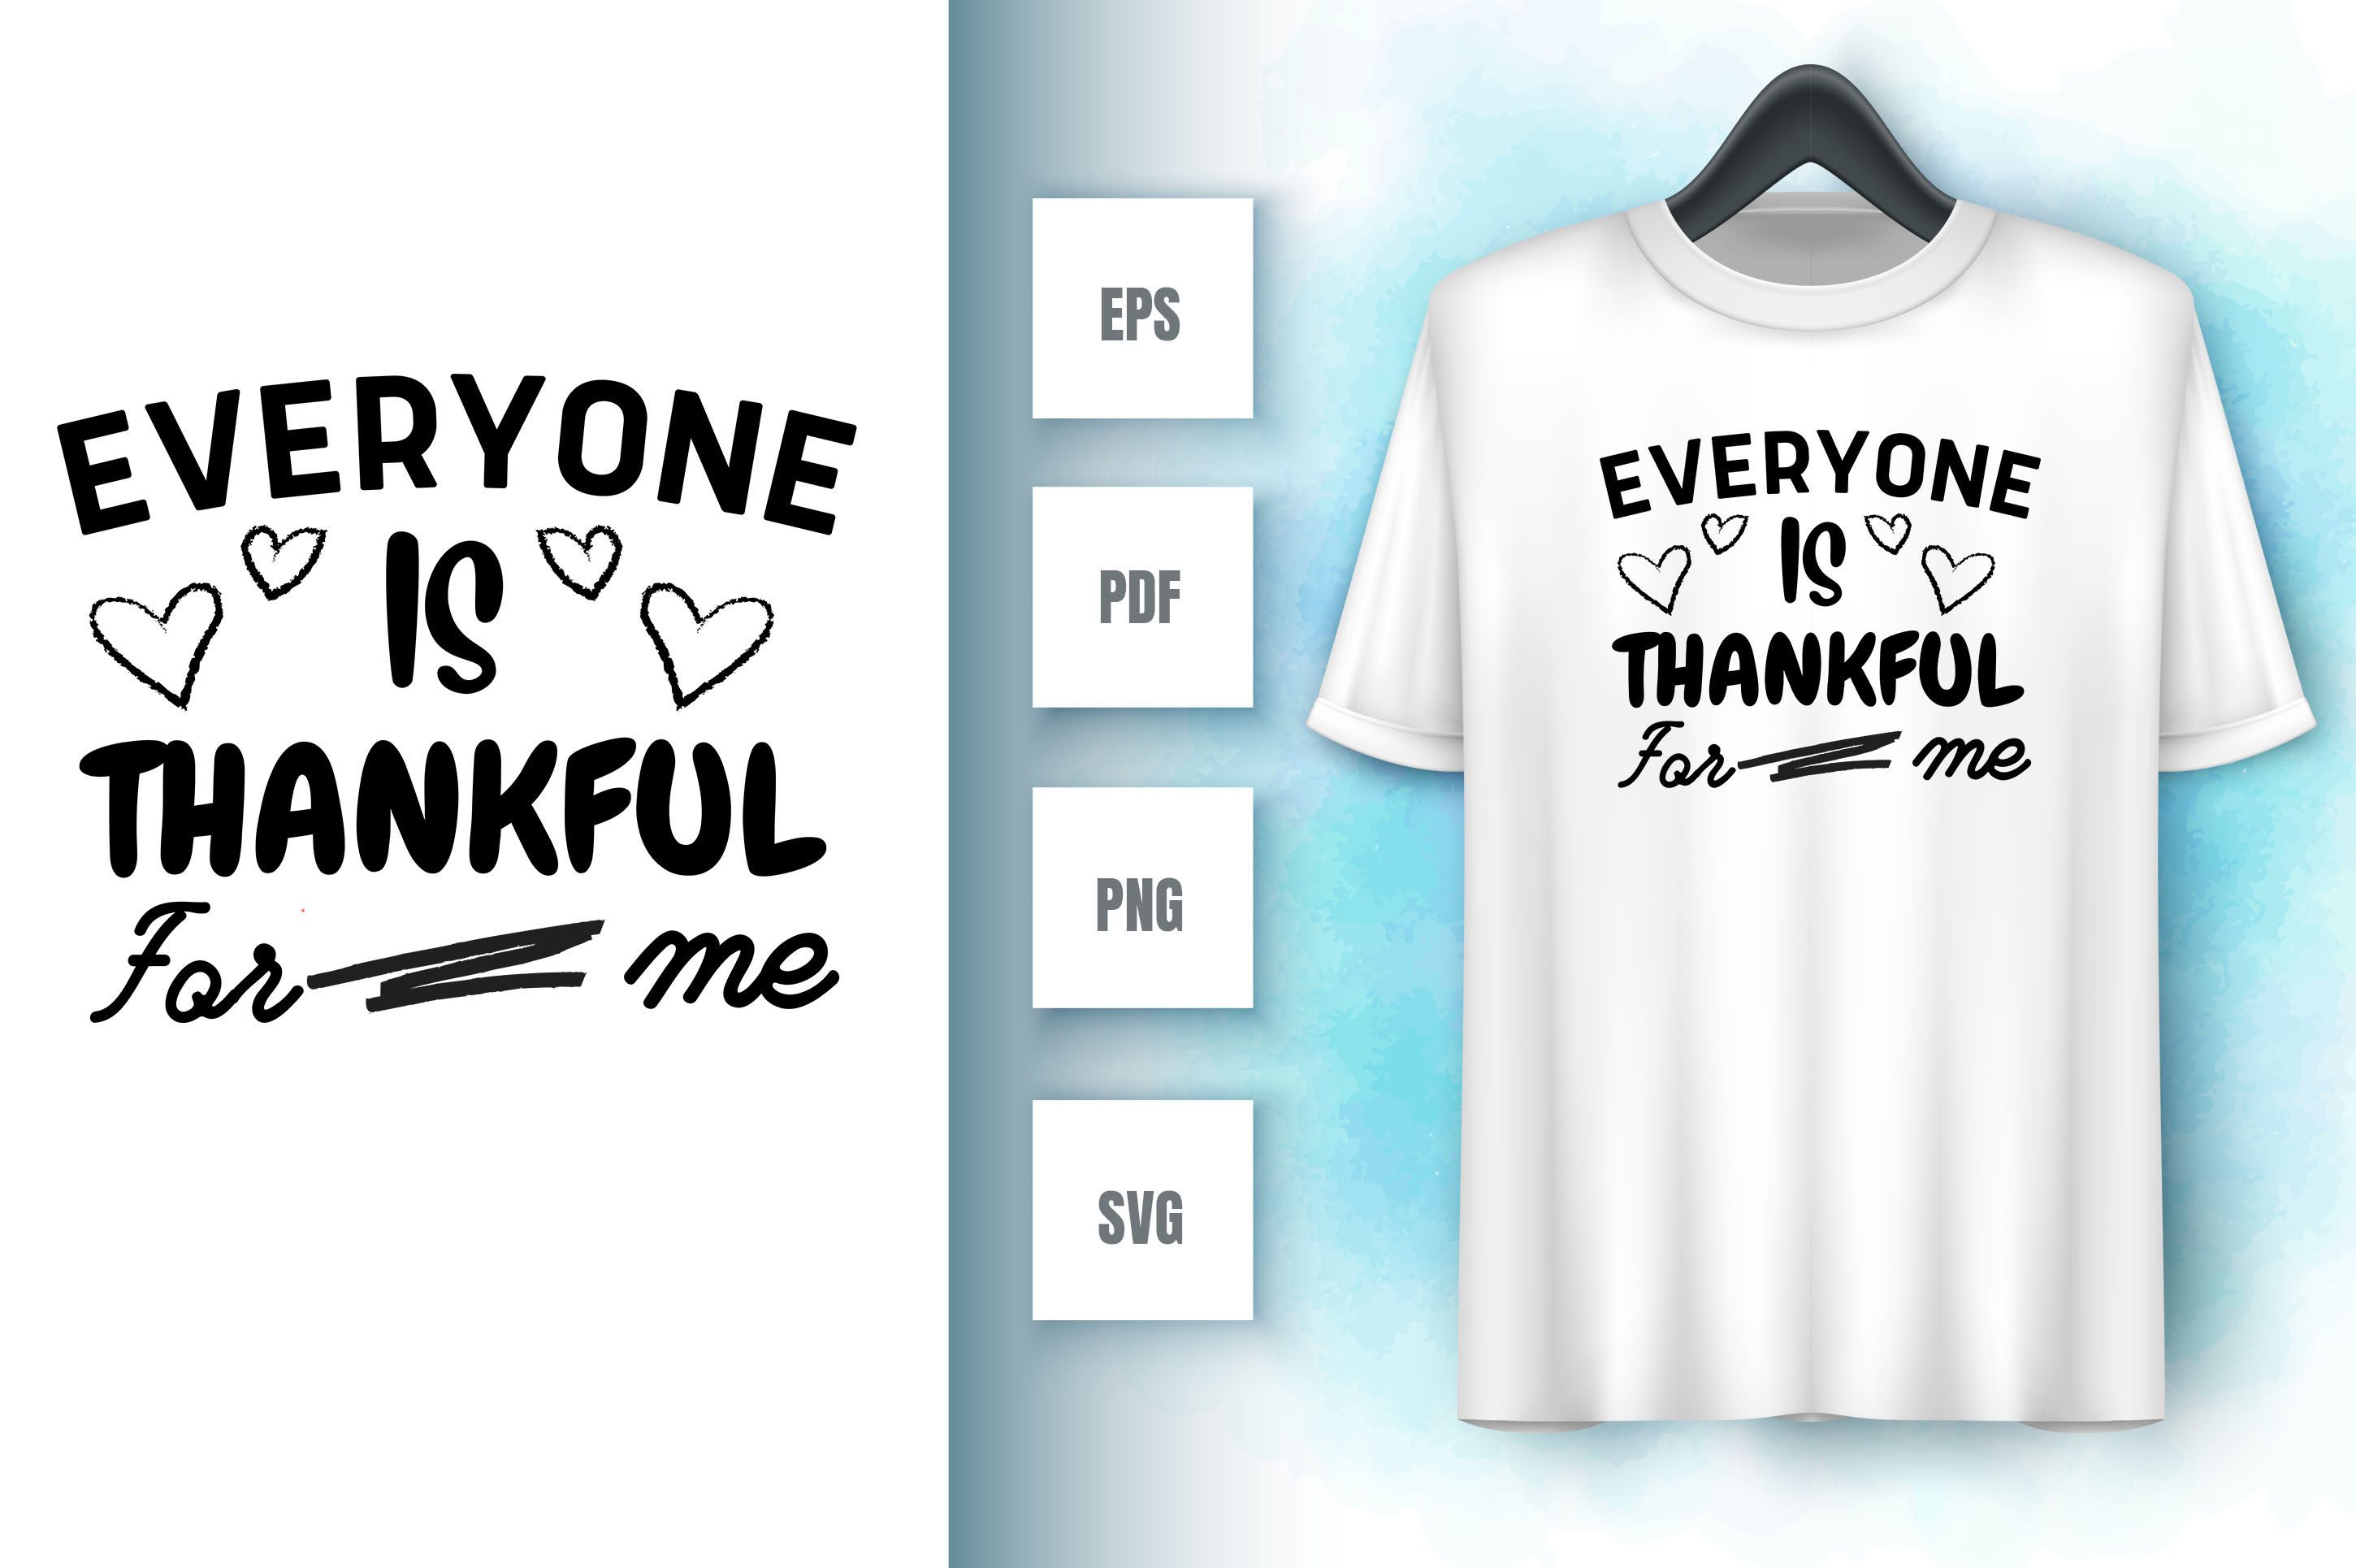 Image of a white t-shirt with an amazing inscription everyone is thankful for me